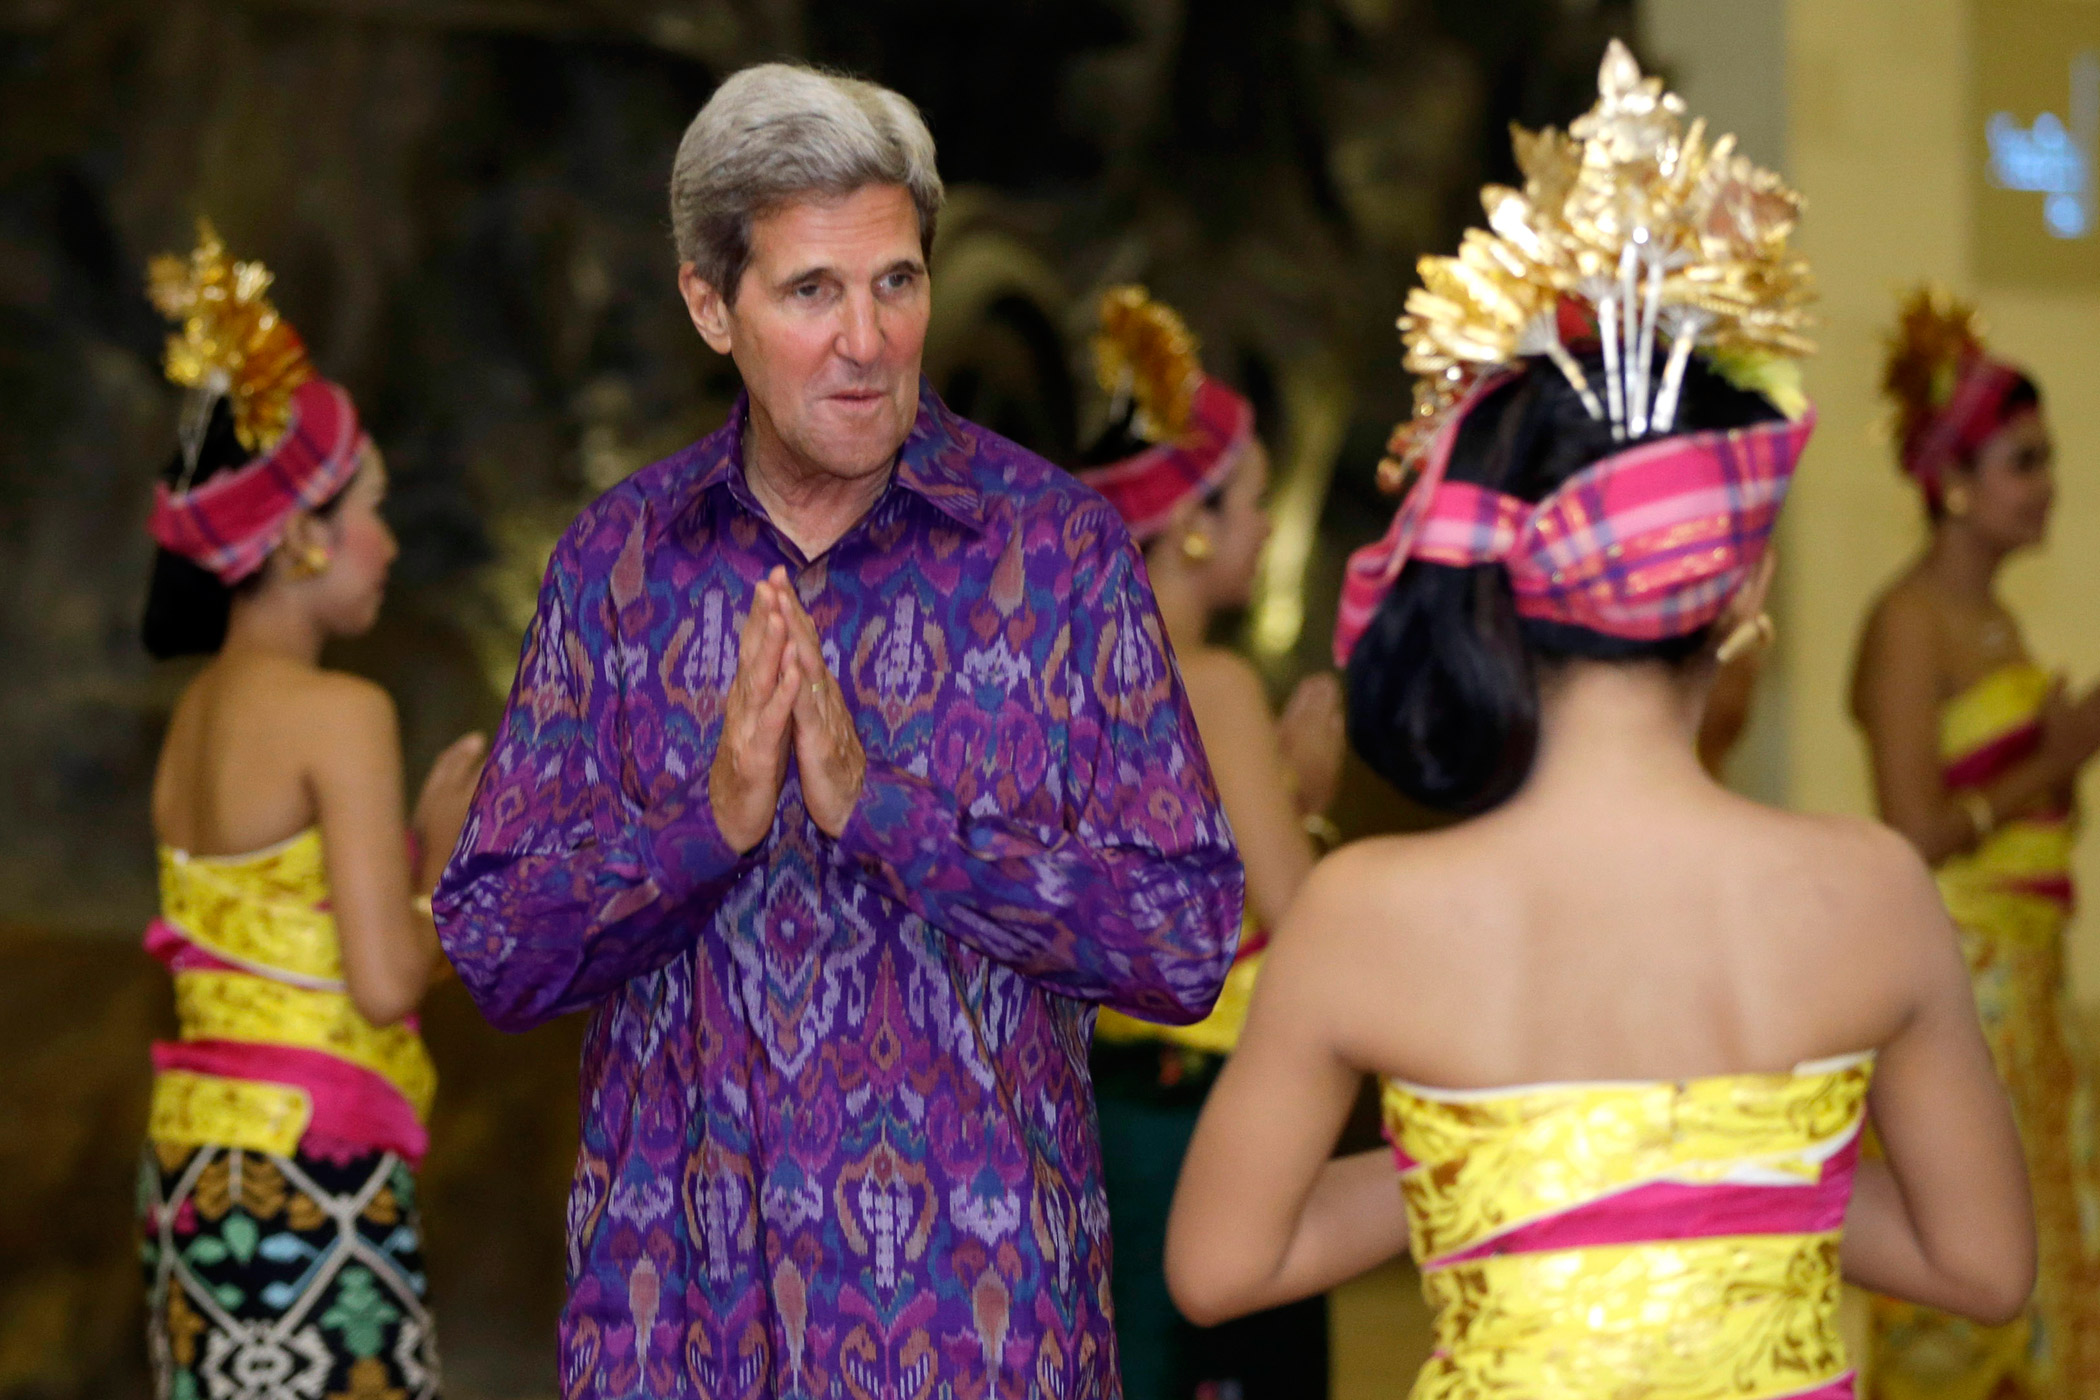 U.S. Secretary of State John Kerry, wearing a traditional Balinese woven fabric called an "endek," arrives at a gala for the leaders at the APEC Summit in Nusa Dua on the Indonesian resort island of Bali on Oct. 7, 2013.